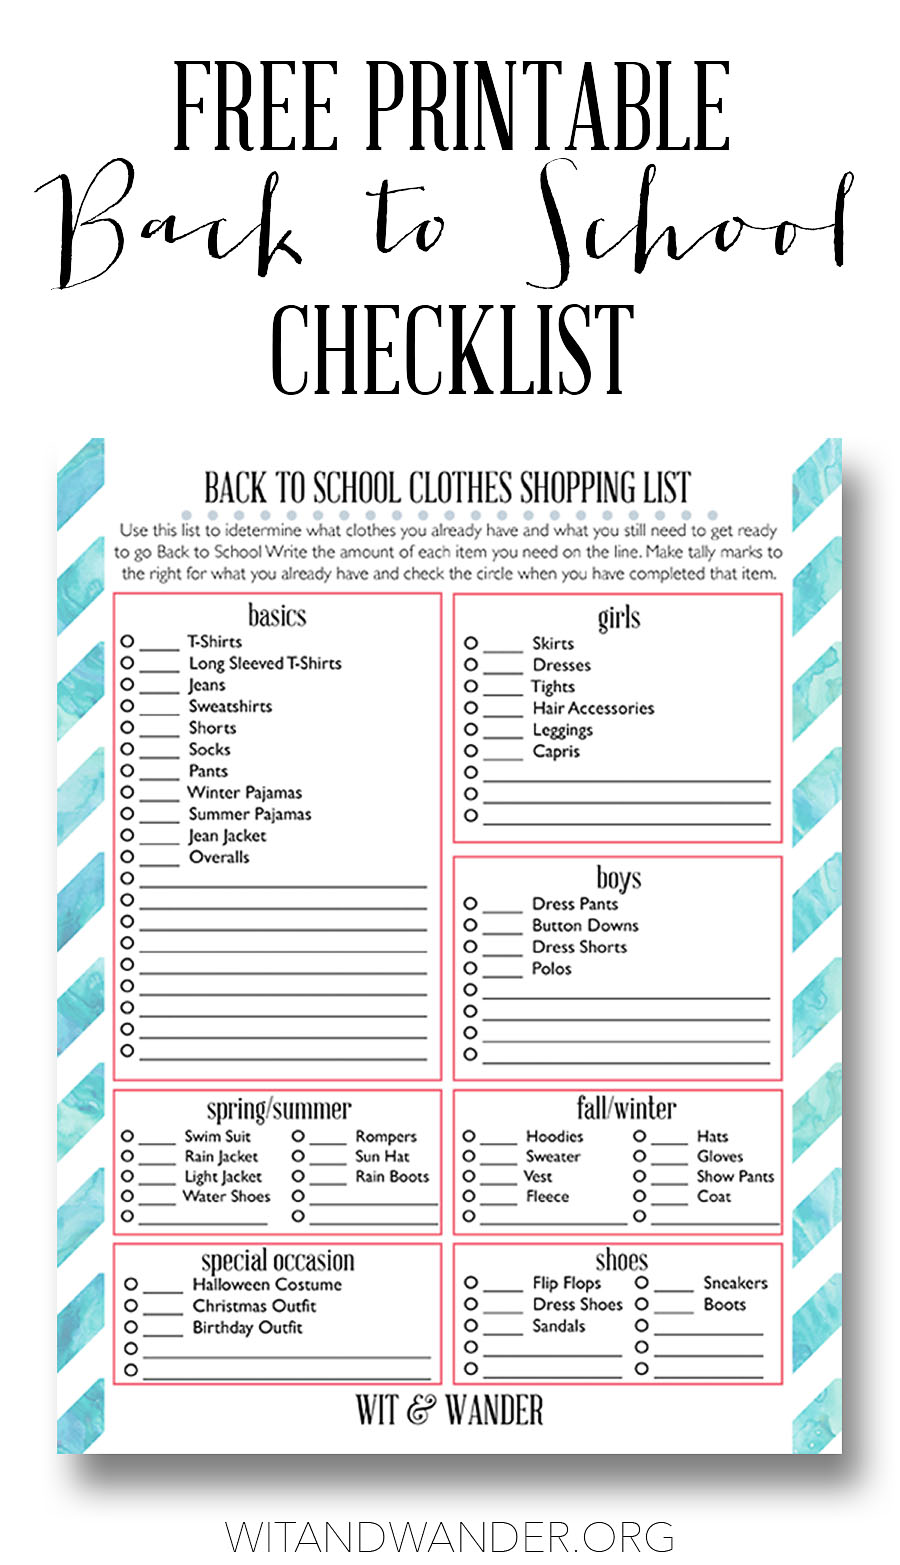 http://ourhandcraftedlife.com/wp-content/uploads/2015/08/Free-Printable-Back-to-School-Clothes-Shopping-Checklist-Wit-Wander.jpg